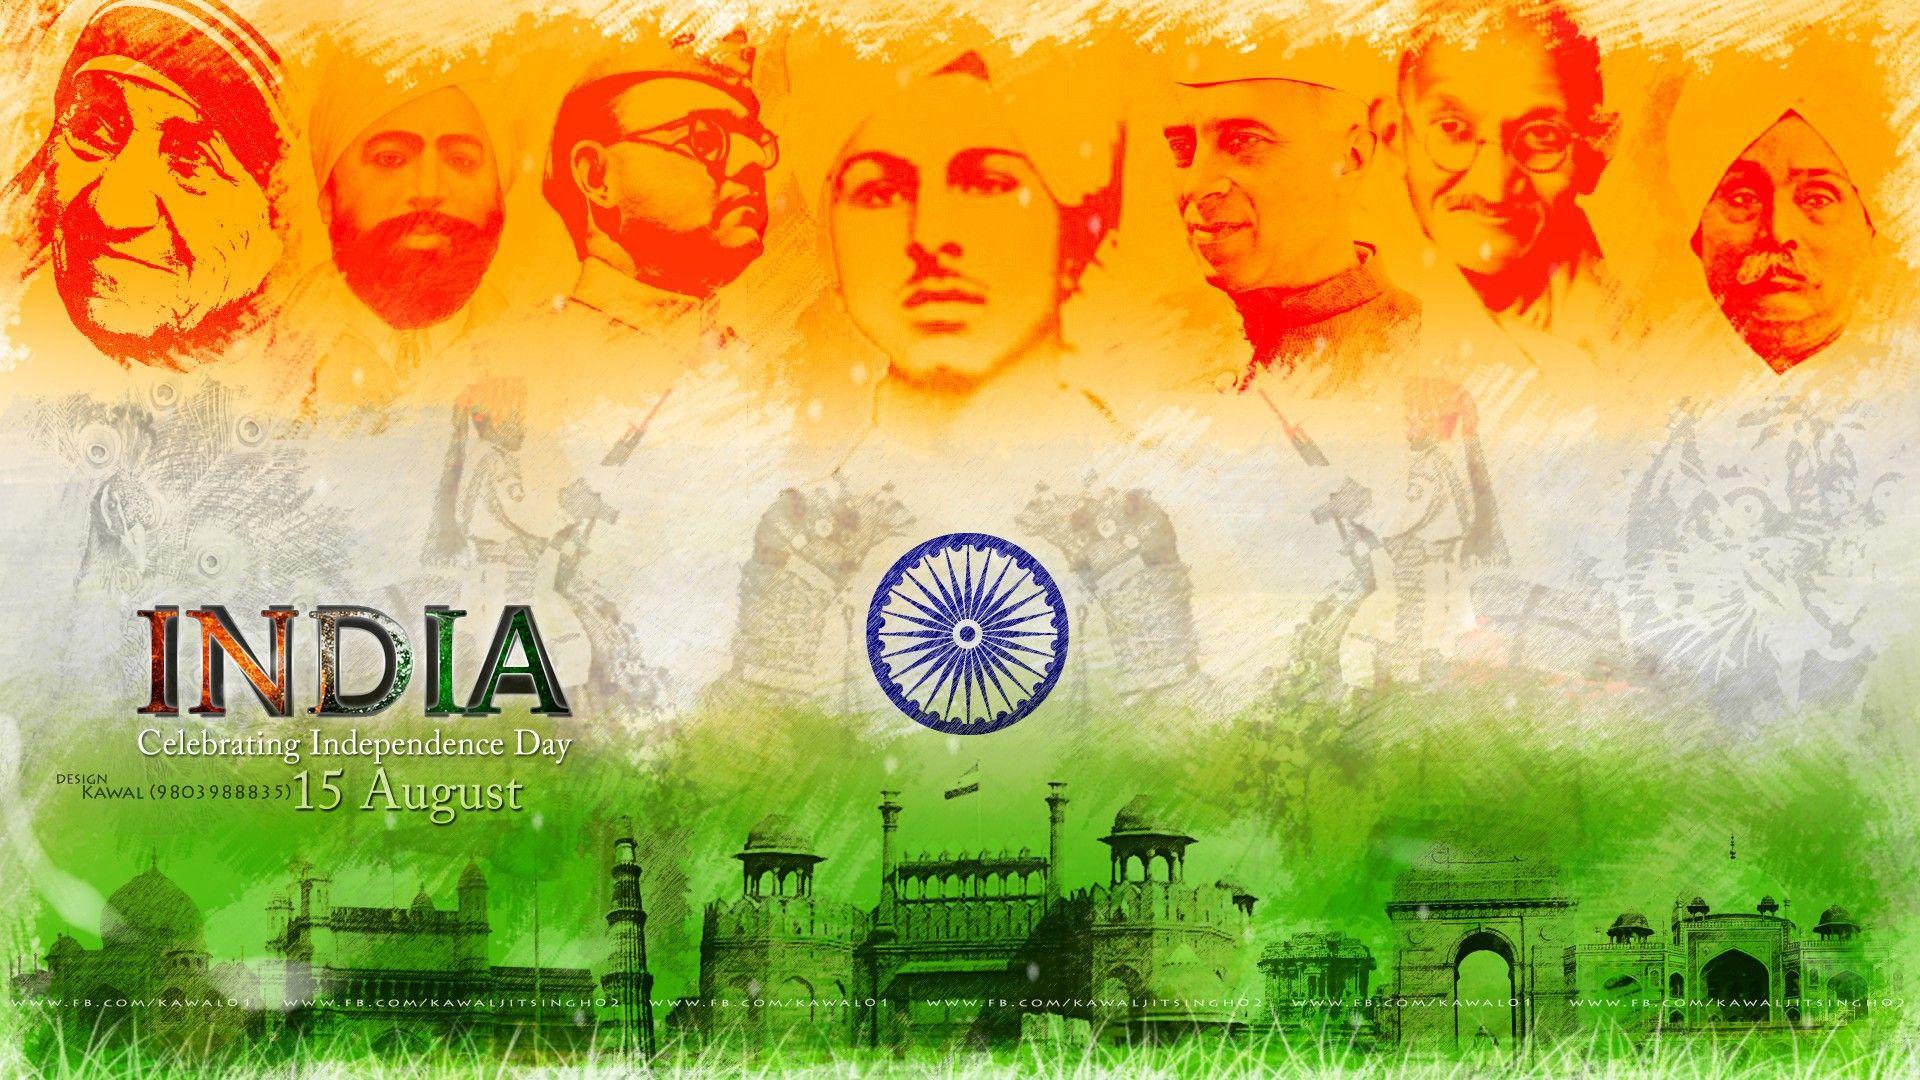 Flag of India wallpaper and image, picture, photo